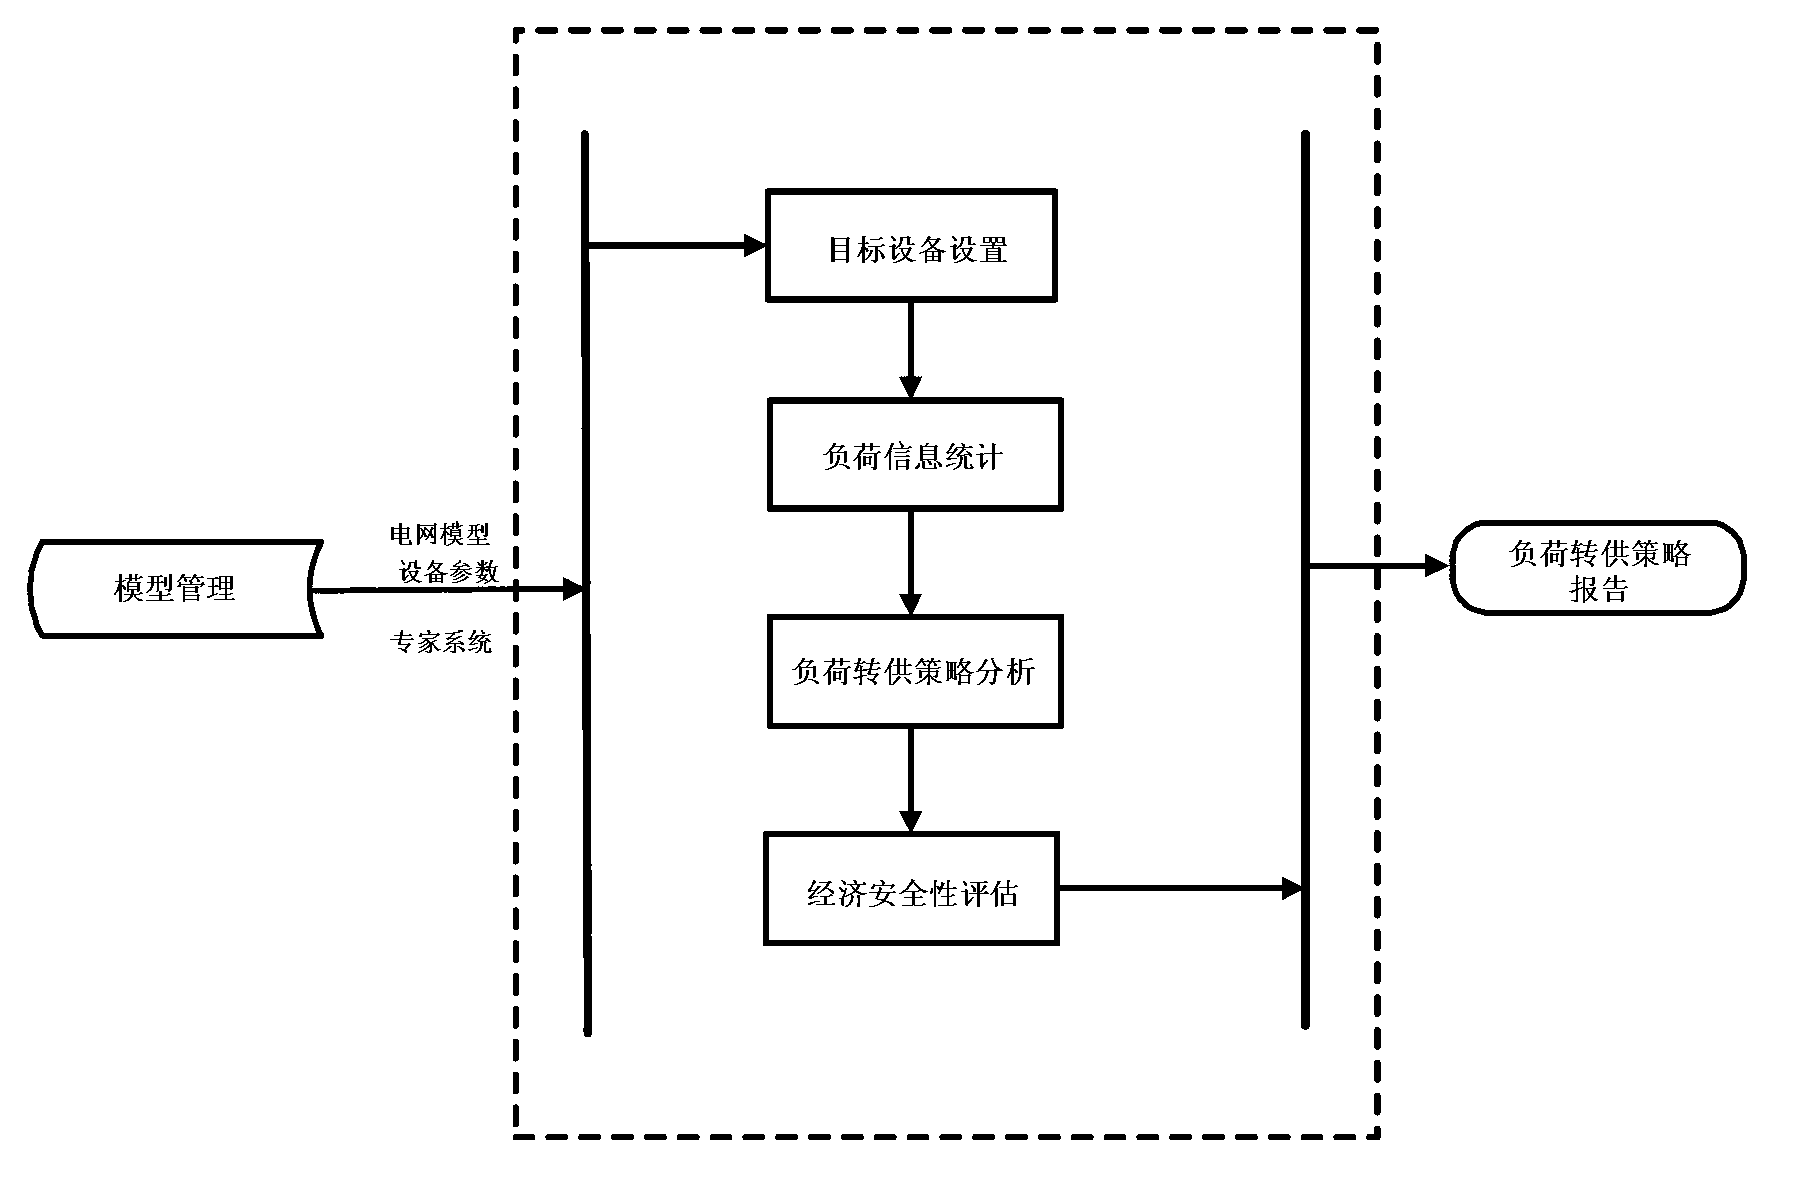 Assisted decision making method for load transfer in regional power grid